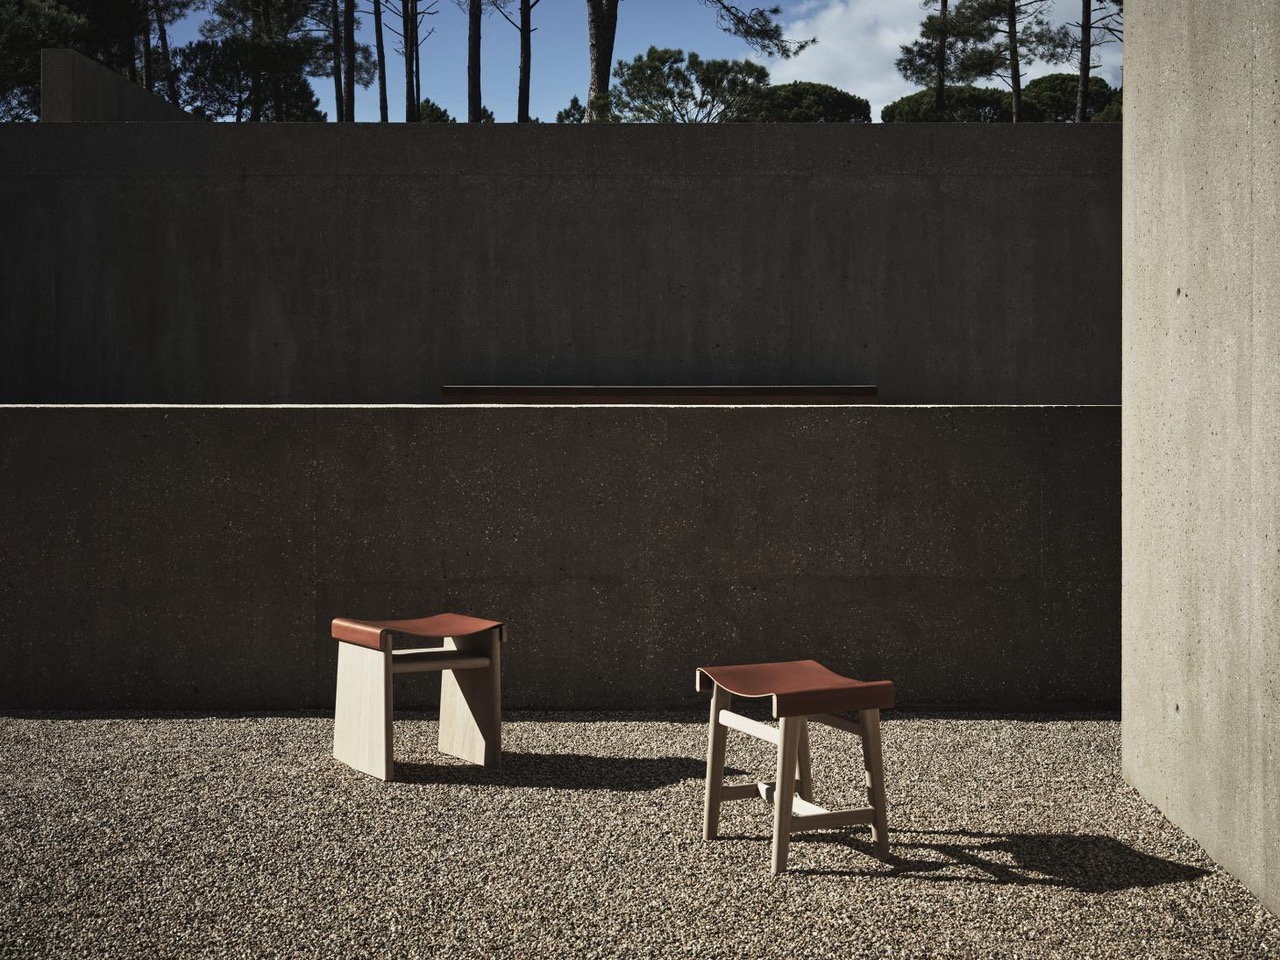 Simple stools from Zara's new furniture collection with Vincent Van Duysen add character to this outdoor space. 